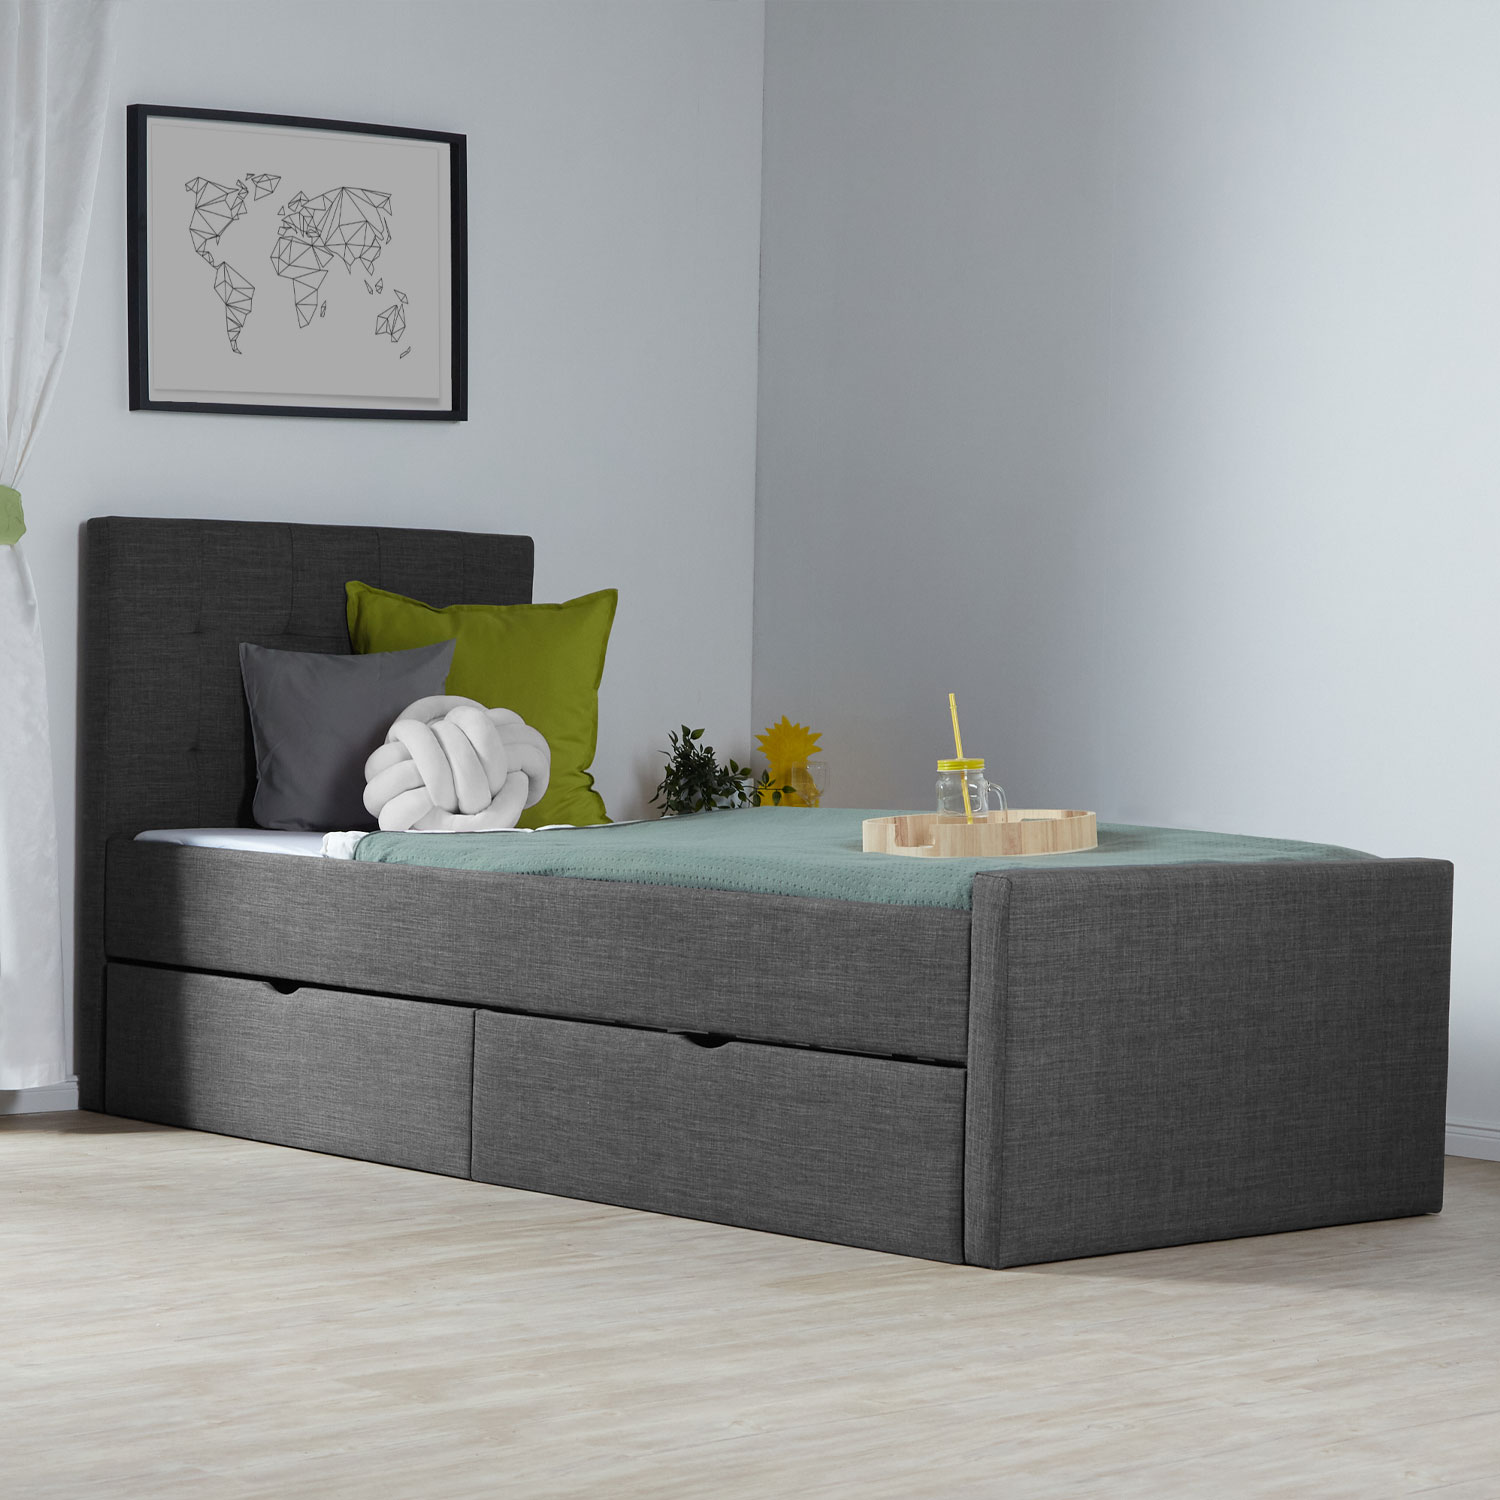 Upholstered Bed Frame Single Bed 90x200 Anthracite Platform Bed Fabric Headboard 2 Drawers